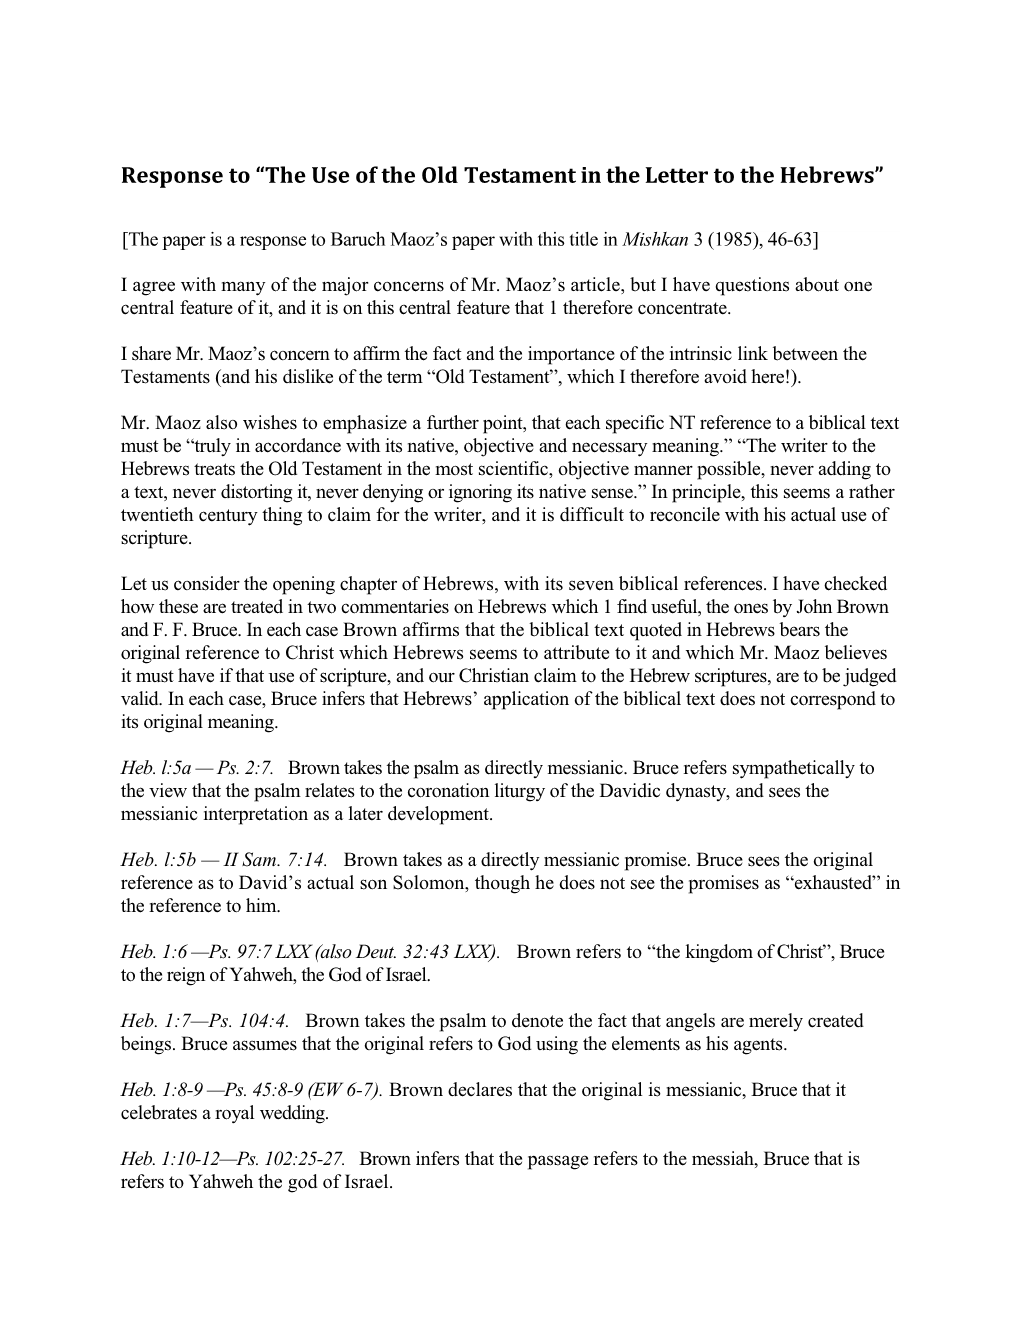 Response to the Use of the Old Testament in the Letter to the Hebrews